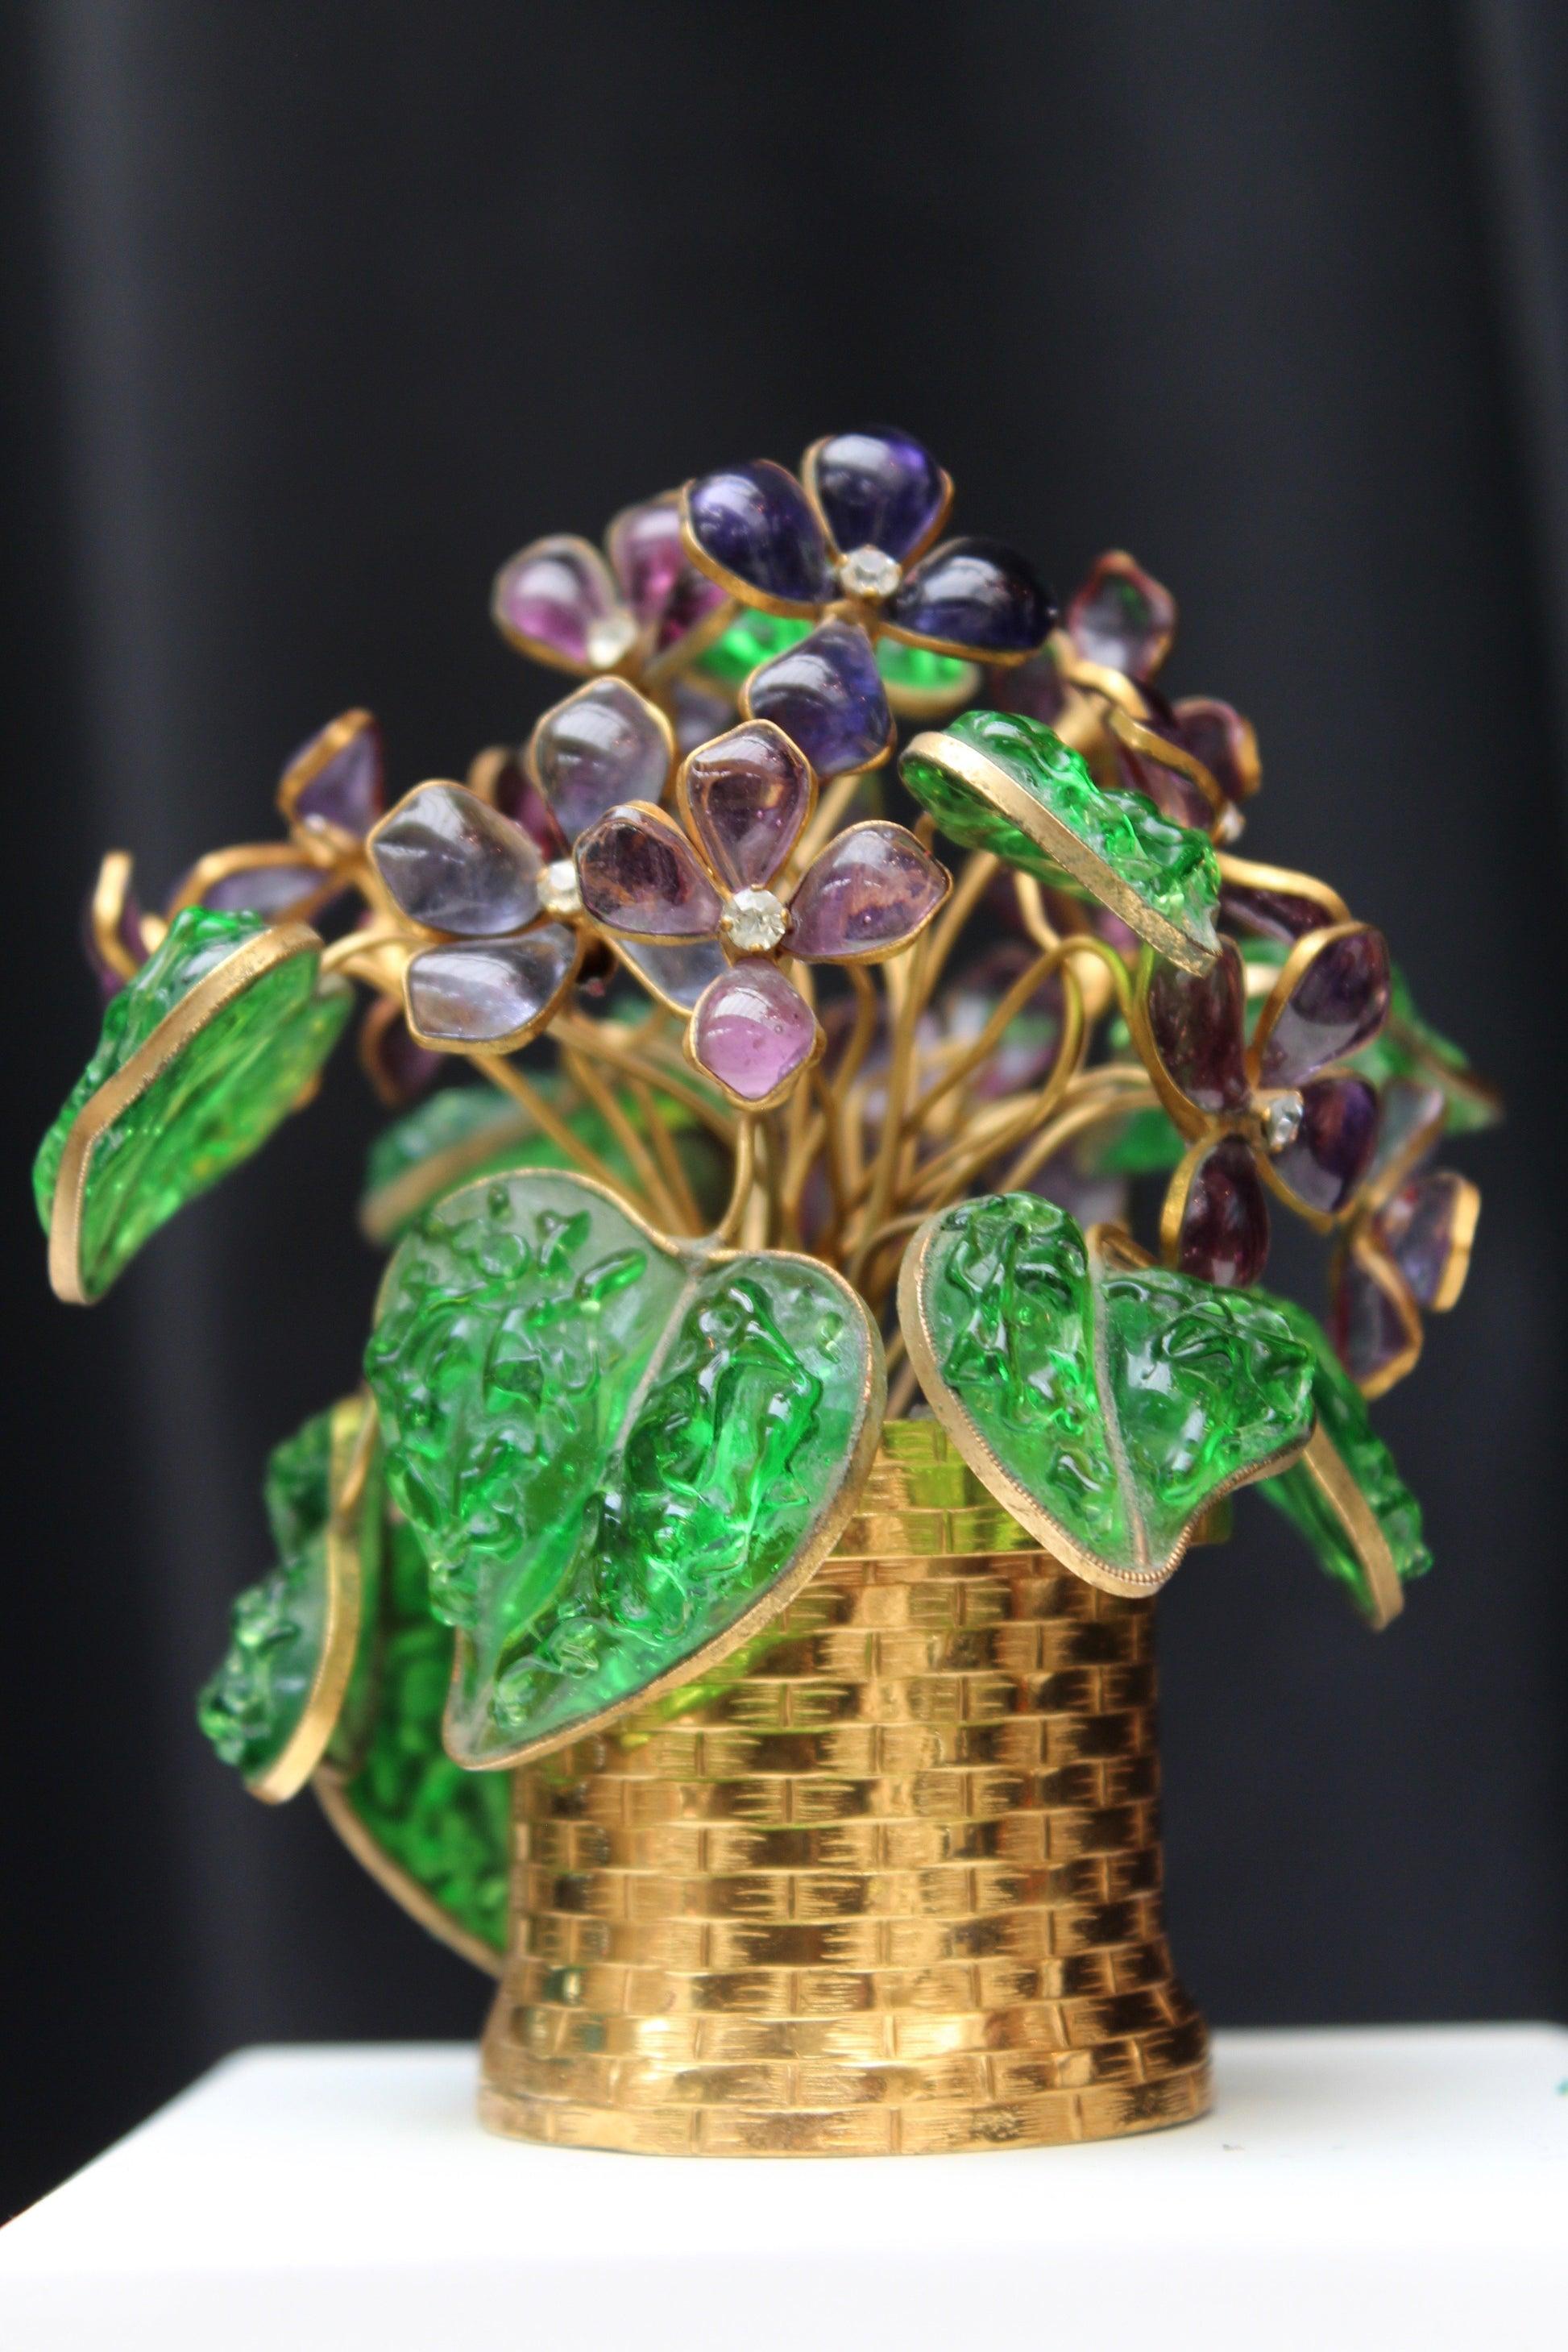 Violet bouquet composed of glass paste. Originally, this bouquet was ordered by Maison Chanel as a gift to its most important clients. Circa 1960s.

Additional information:
Condition: Very good condition
Dimensions: Height: 11 cm (4.33